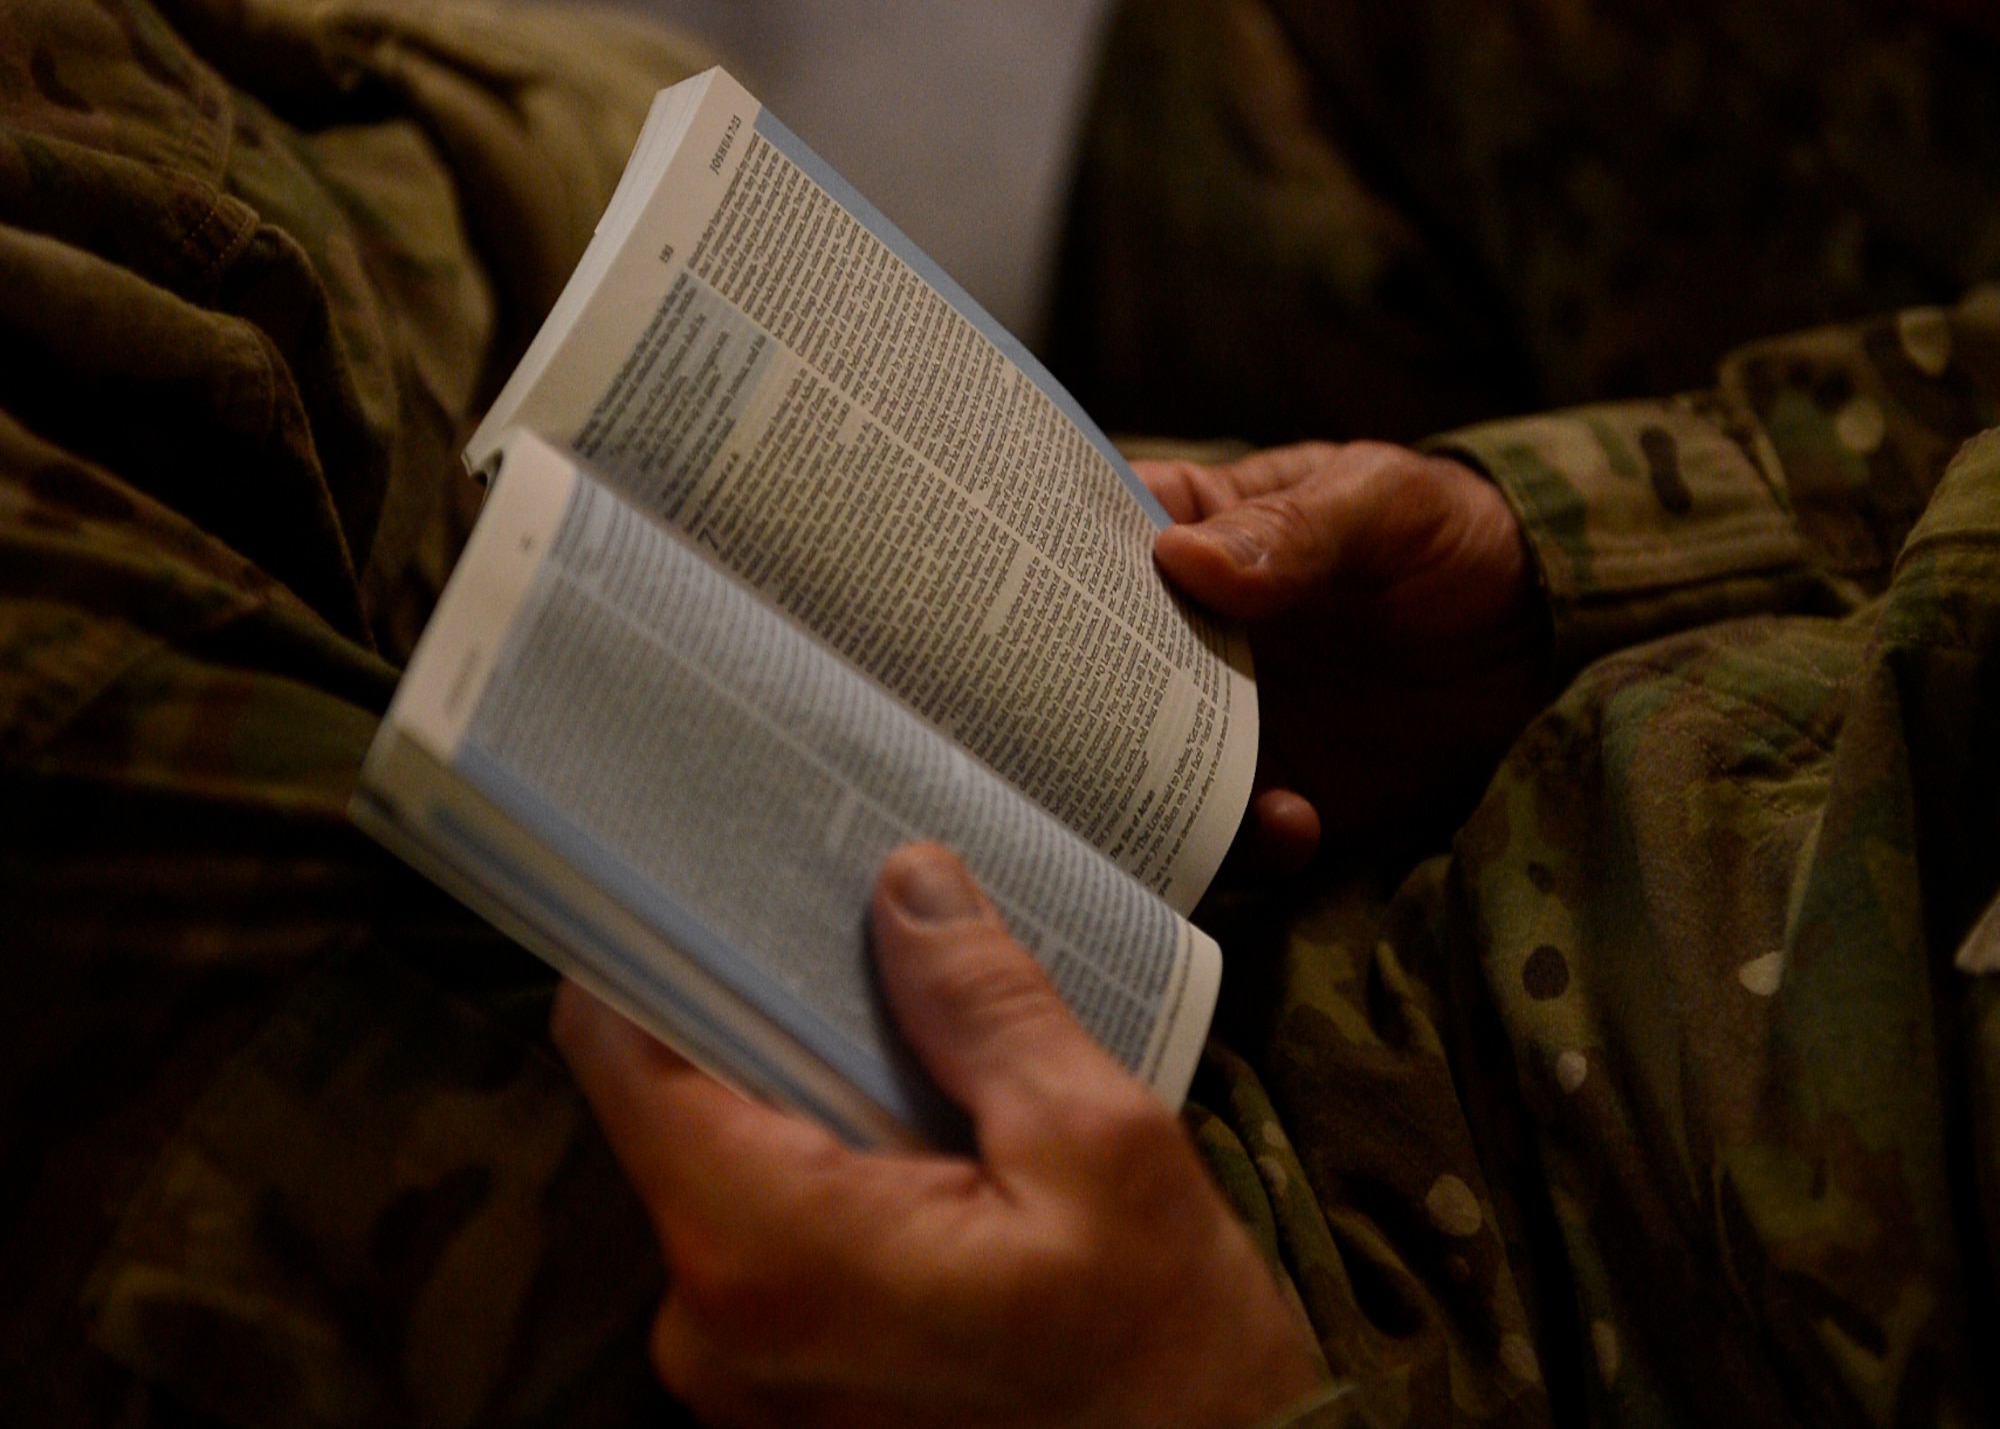 A U.S. Air Force Airman looks at his bible during a service at Bagram Airfield, Afghanistan June 22, 2014.  The Chaplain’s priorities here are to enhance Airmen’s readiness by preparing them with spiritual resiliency, engaging them through ministry of presence and spiritual care and ensuring worship and religious education opportunities are available to all. (U.S. Air Force photo by Staff Sgt. Evelyn Chavez/Released)